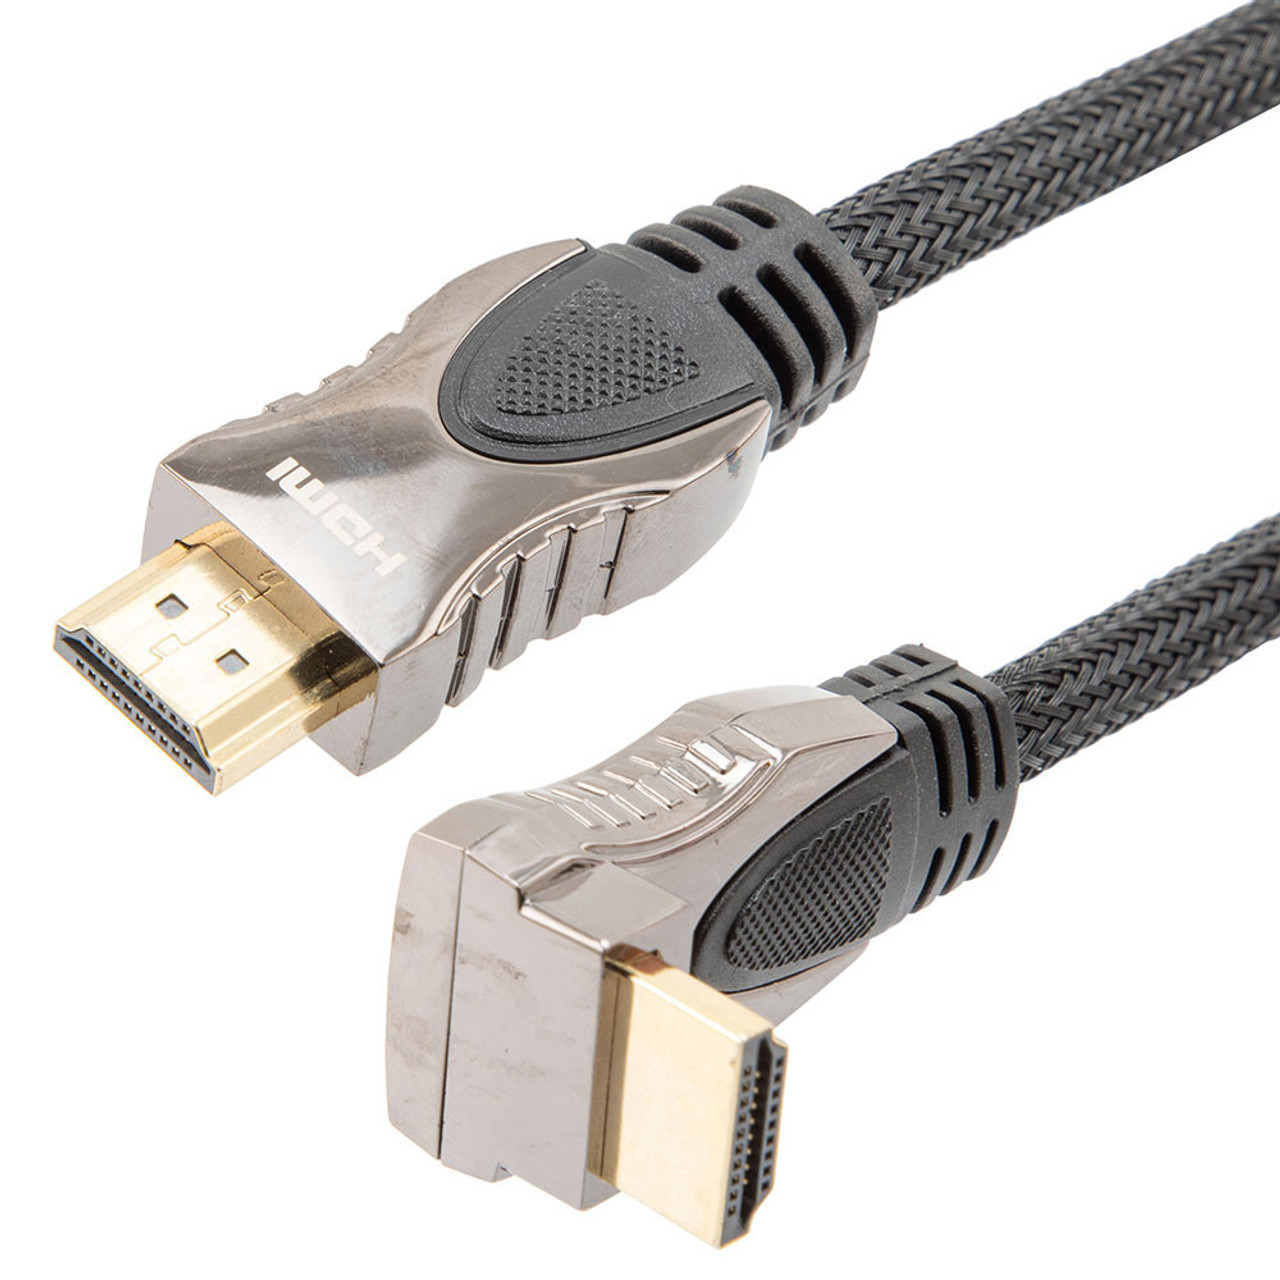 NavePoint HDMI 2.0 Male to Male Braided Cable, PVC with Nylon, Black, Zinc Alloy shell, Supports 4K @ 60Hz, Right Angle Straight to Right Angle Up, 3M